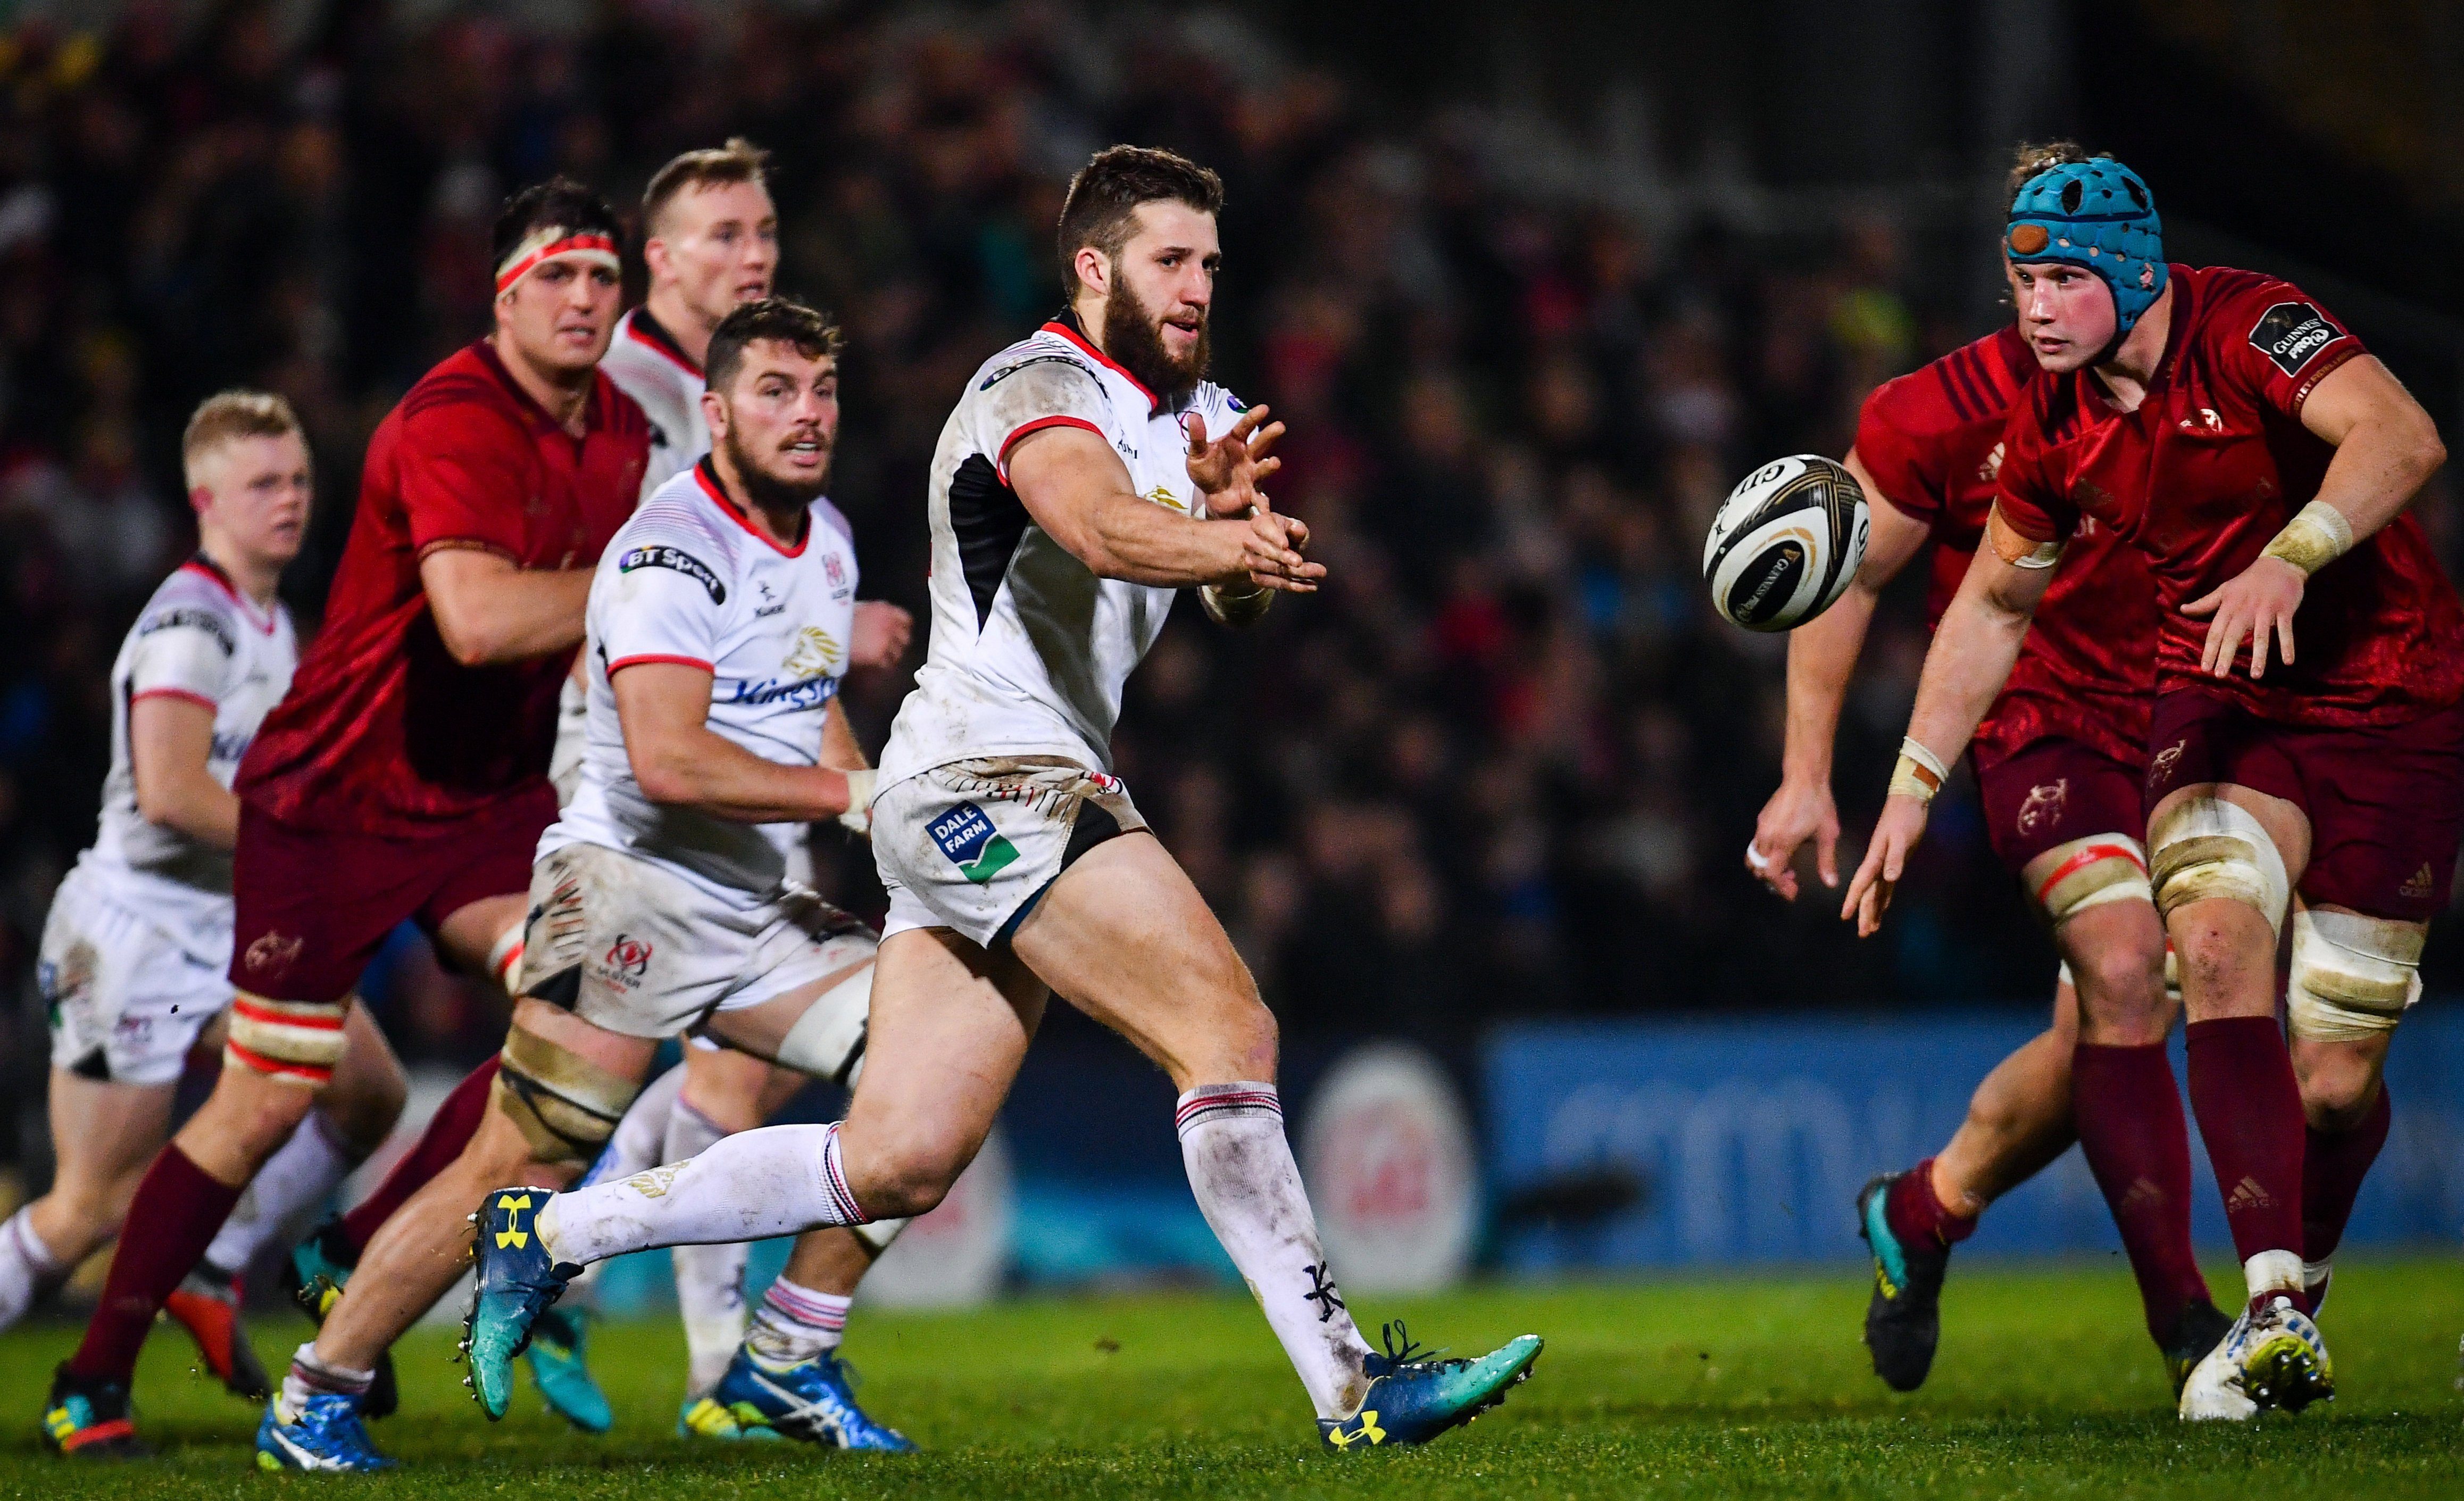 Ulster’s gritty performance at Fortress Thomond: Match Review